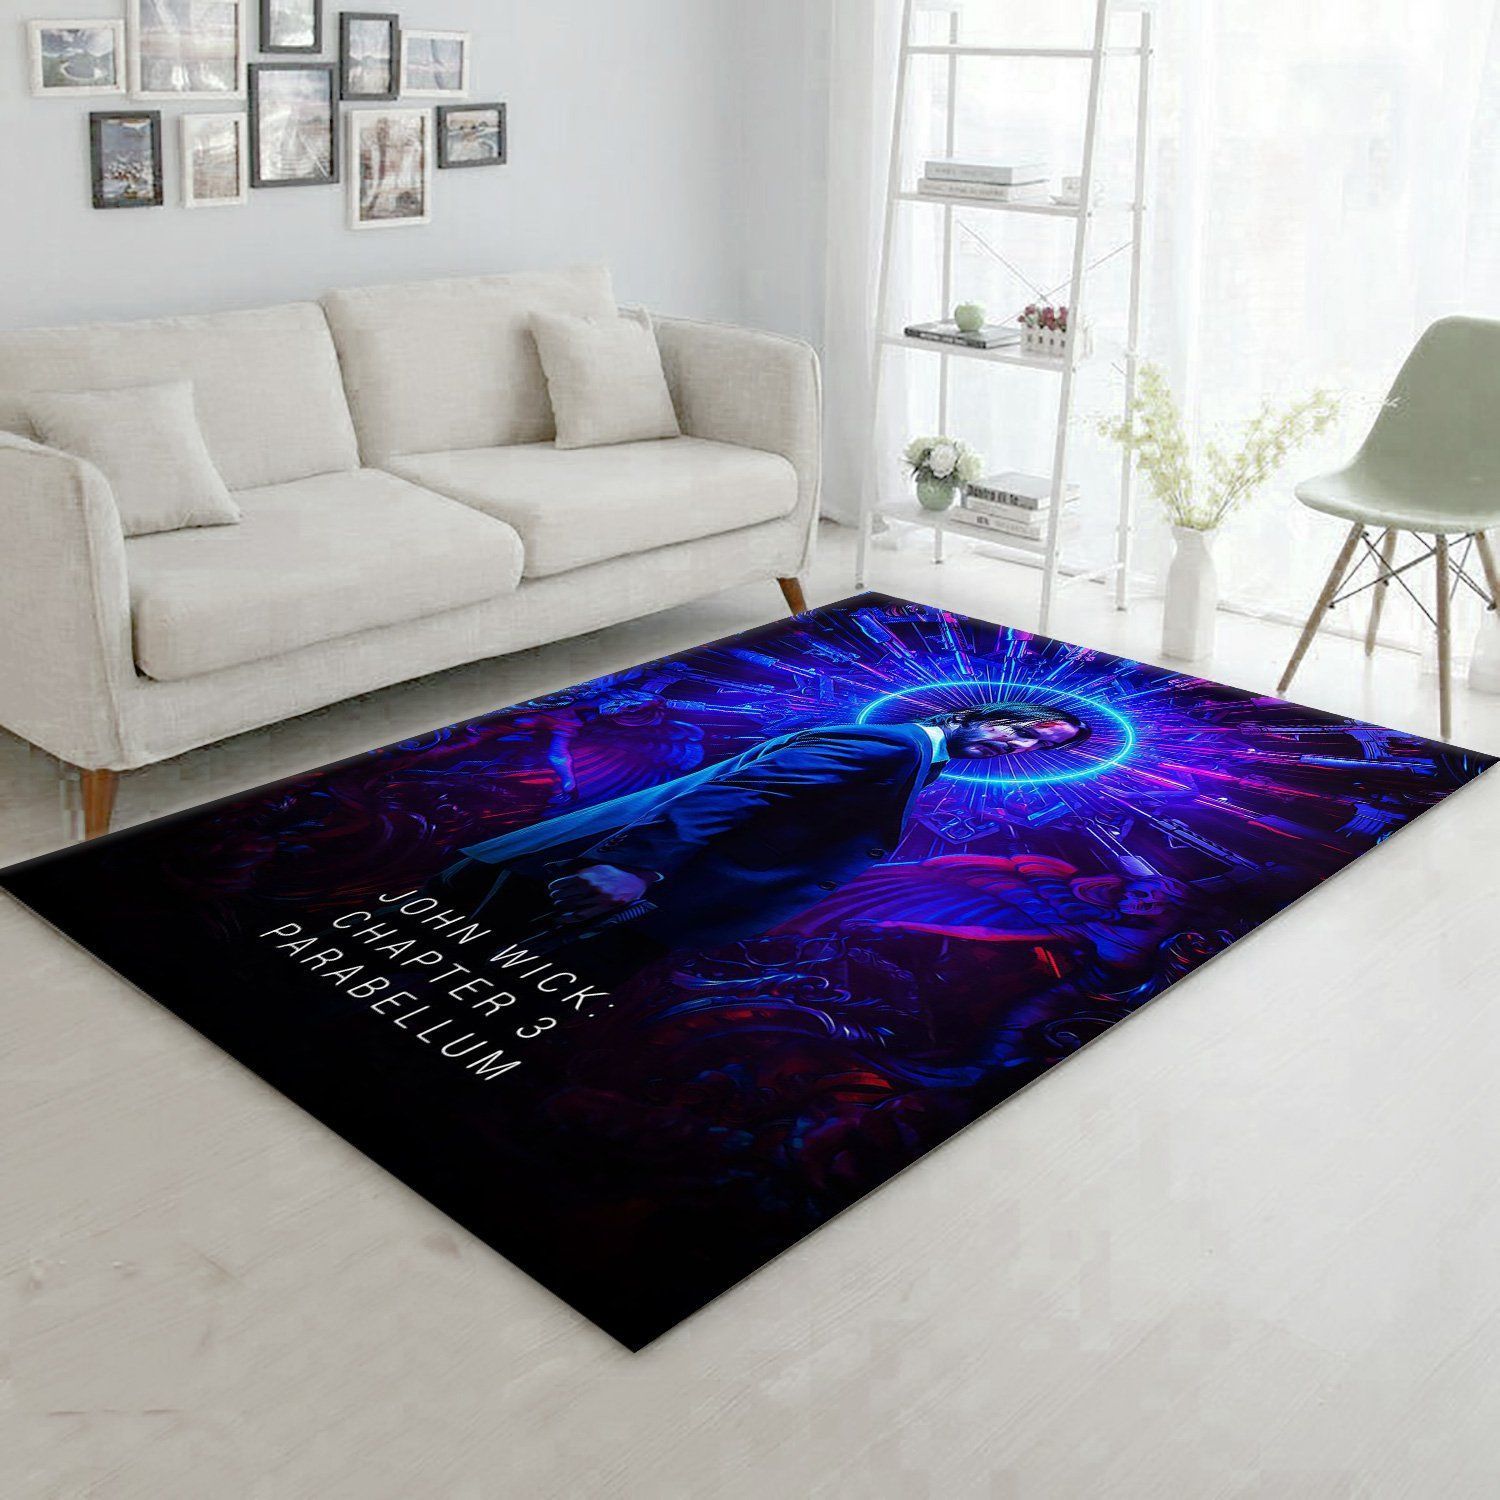 John Wick Chapter 3 2019 Area Rug Art Painting Movie Rugs Home US Decor - Indoor Outdoor Rugs 2